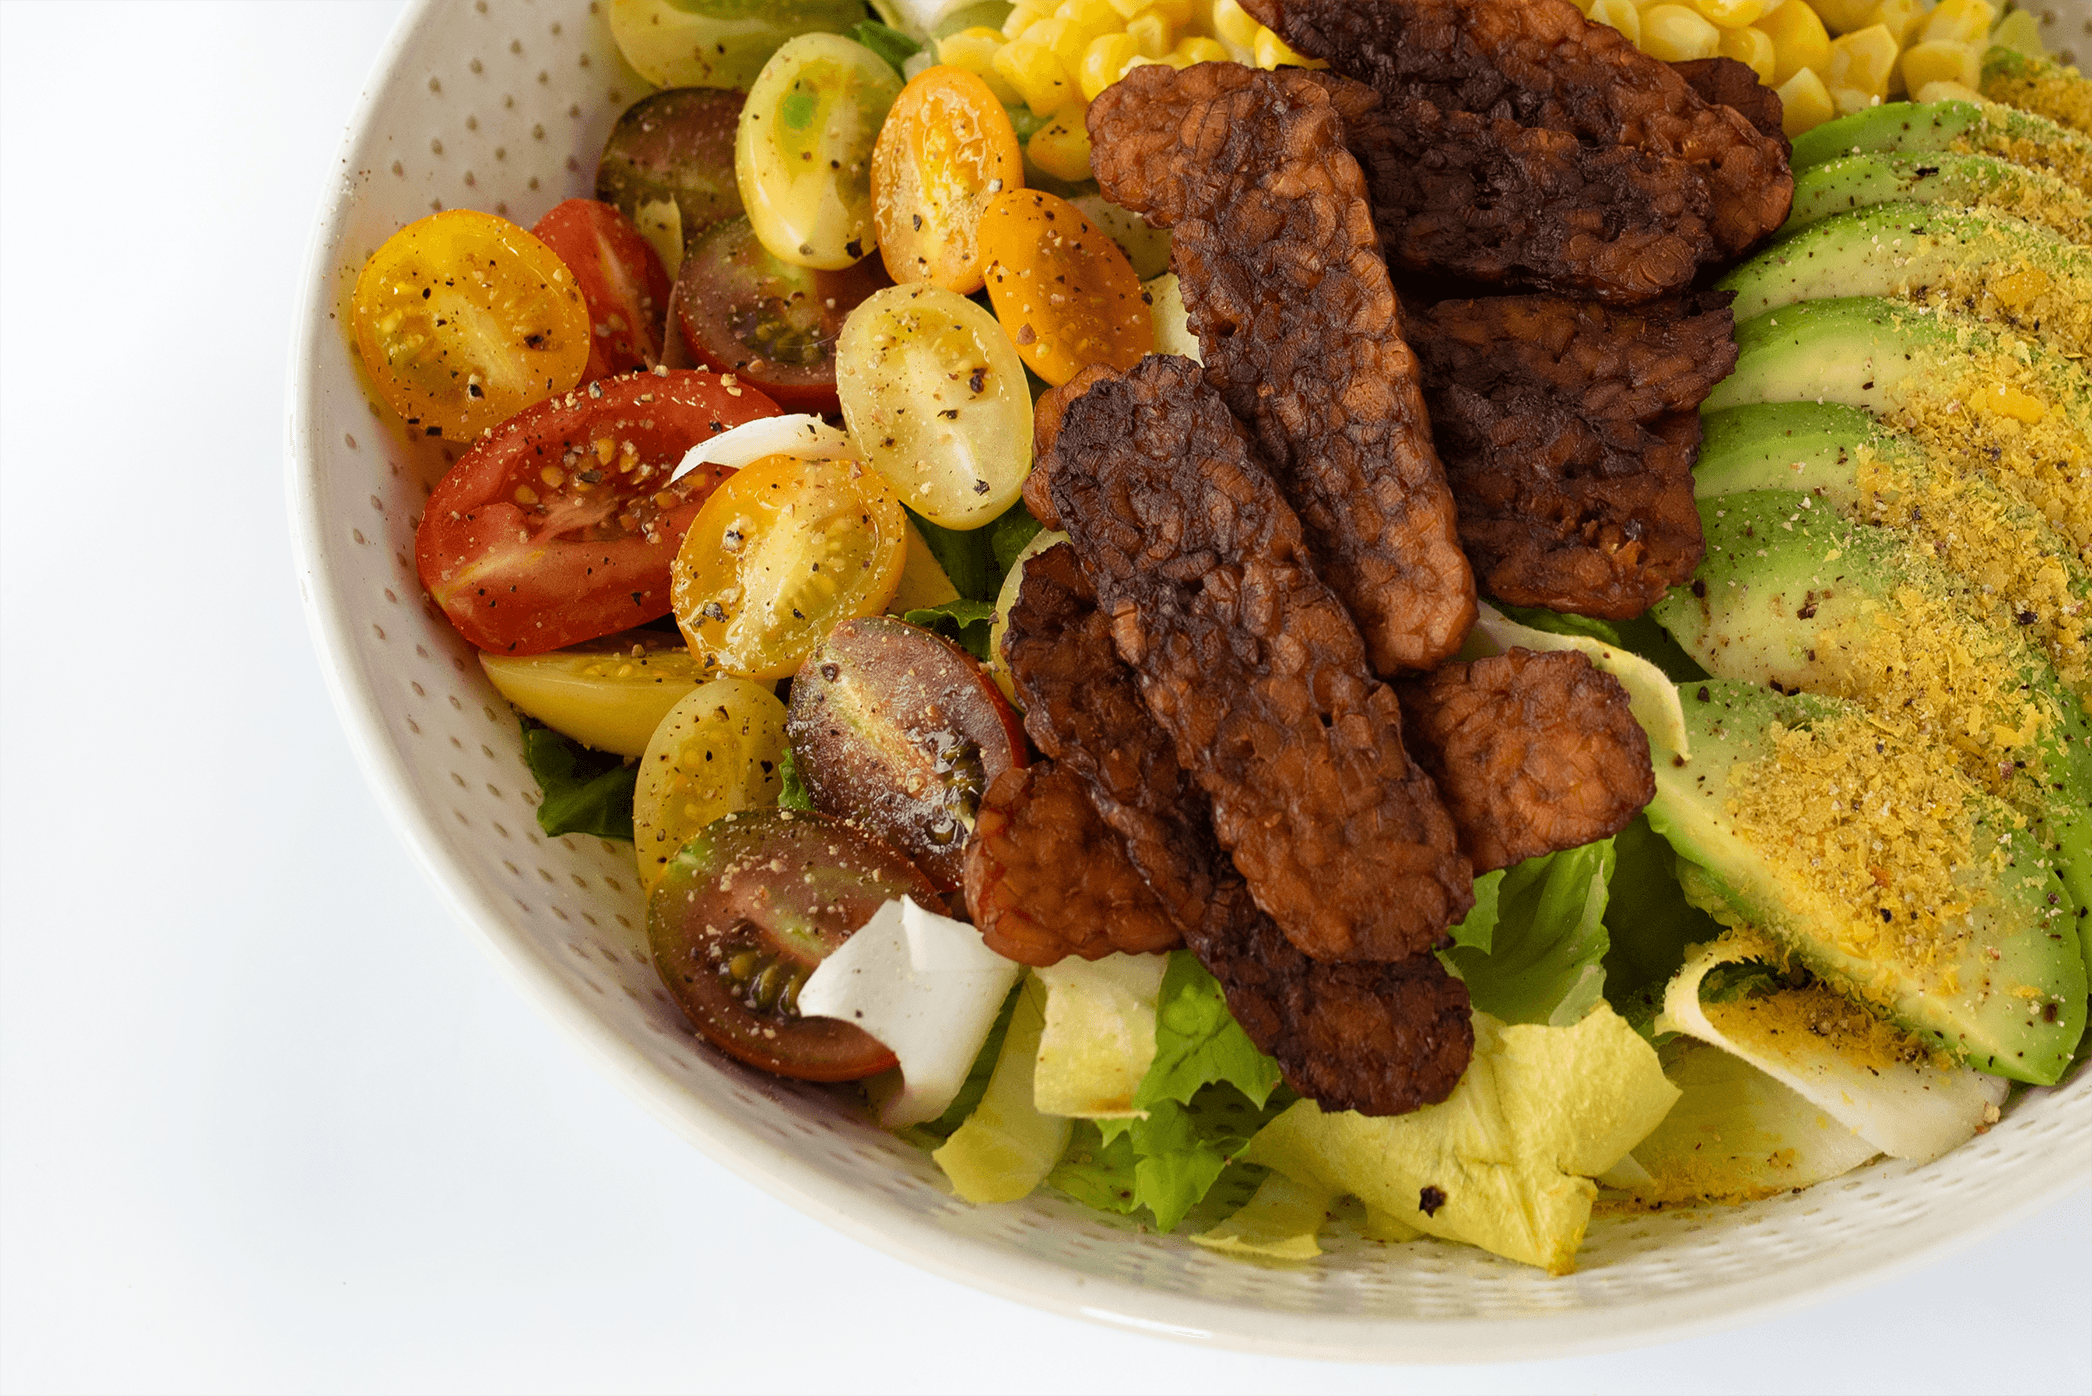 Plant-Based Cobb Salad with delicious Vegan Bacon that's better than the real deal!